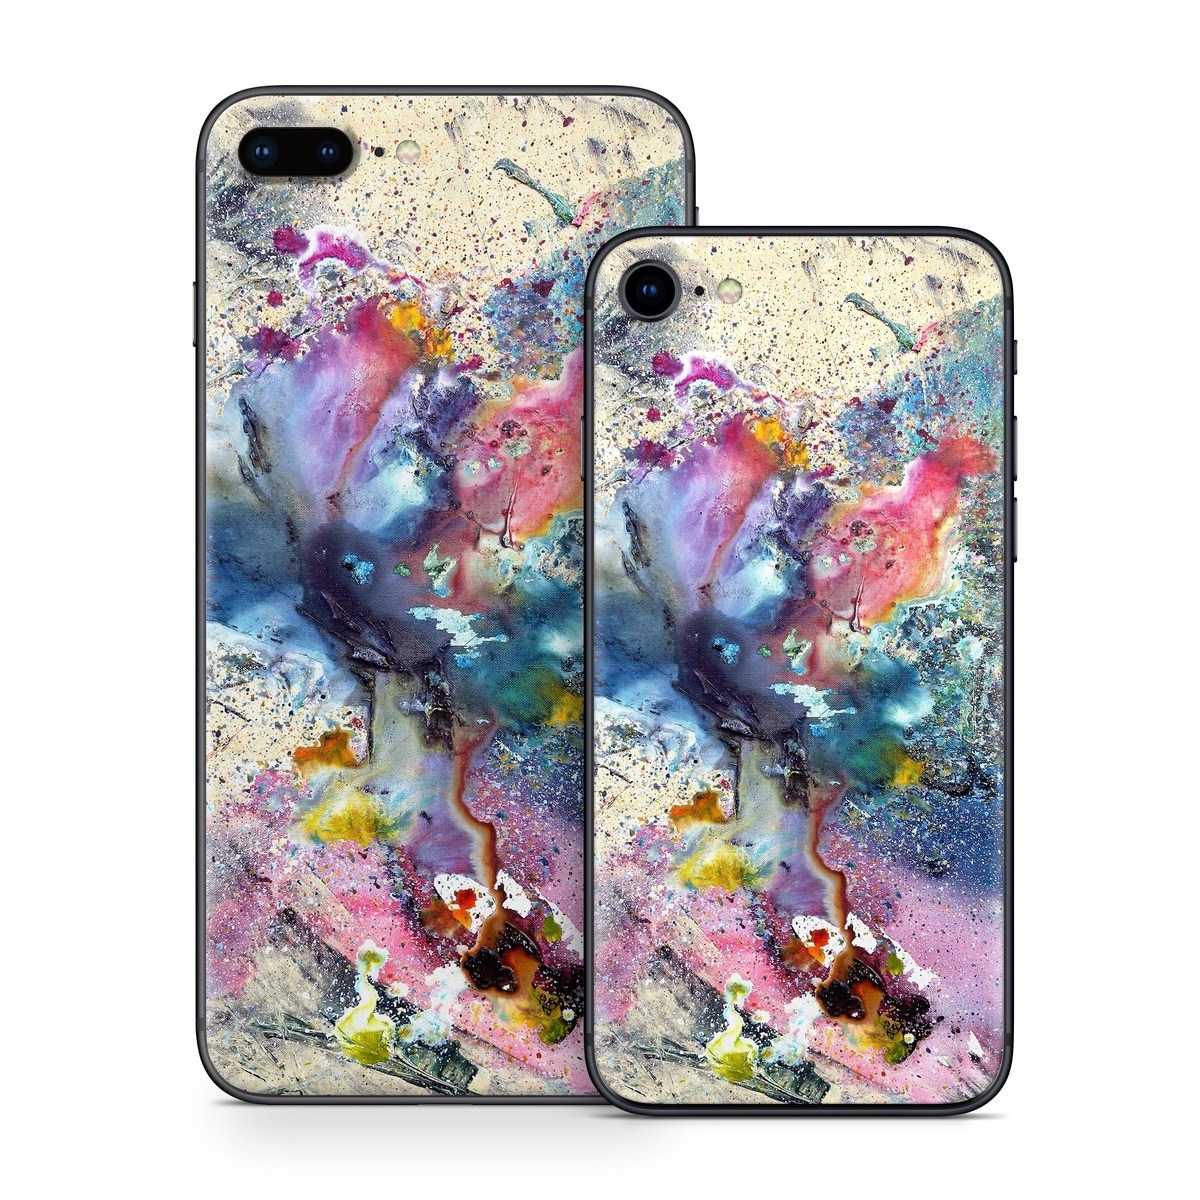 iPhone 8 Skin design of Watercolor paint, Painting, Acrylic paint, Art, Modern art, Paint, Visual arts, Space, Colorfulness, Illustration, with gray, black, blue, red, pink colors